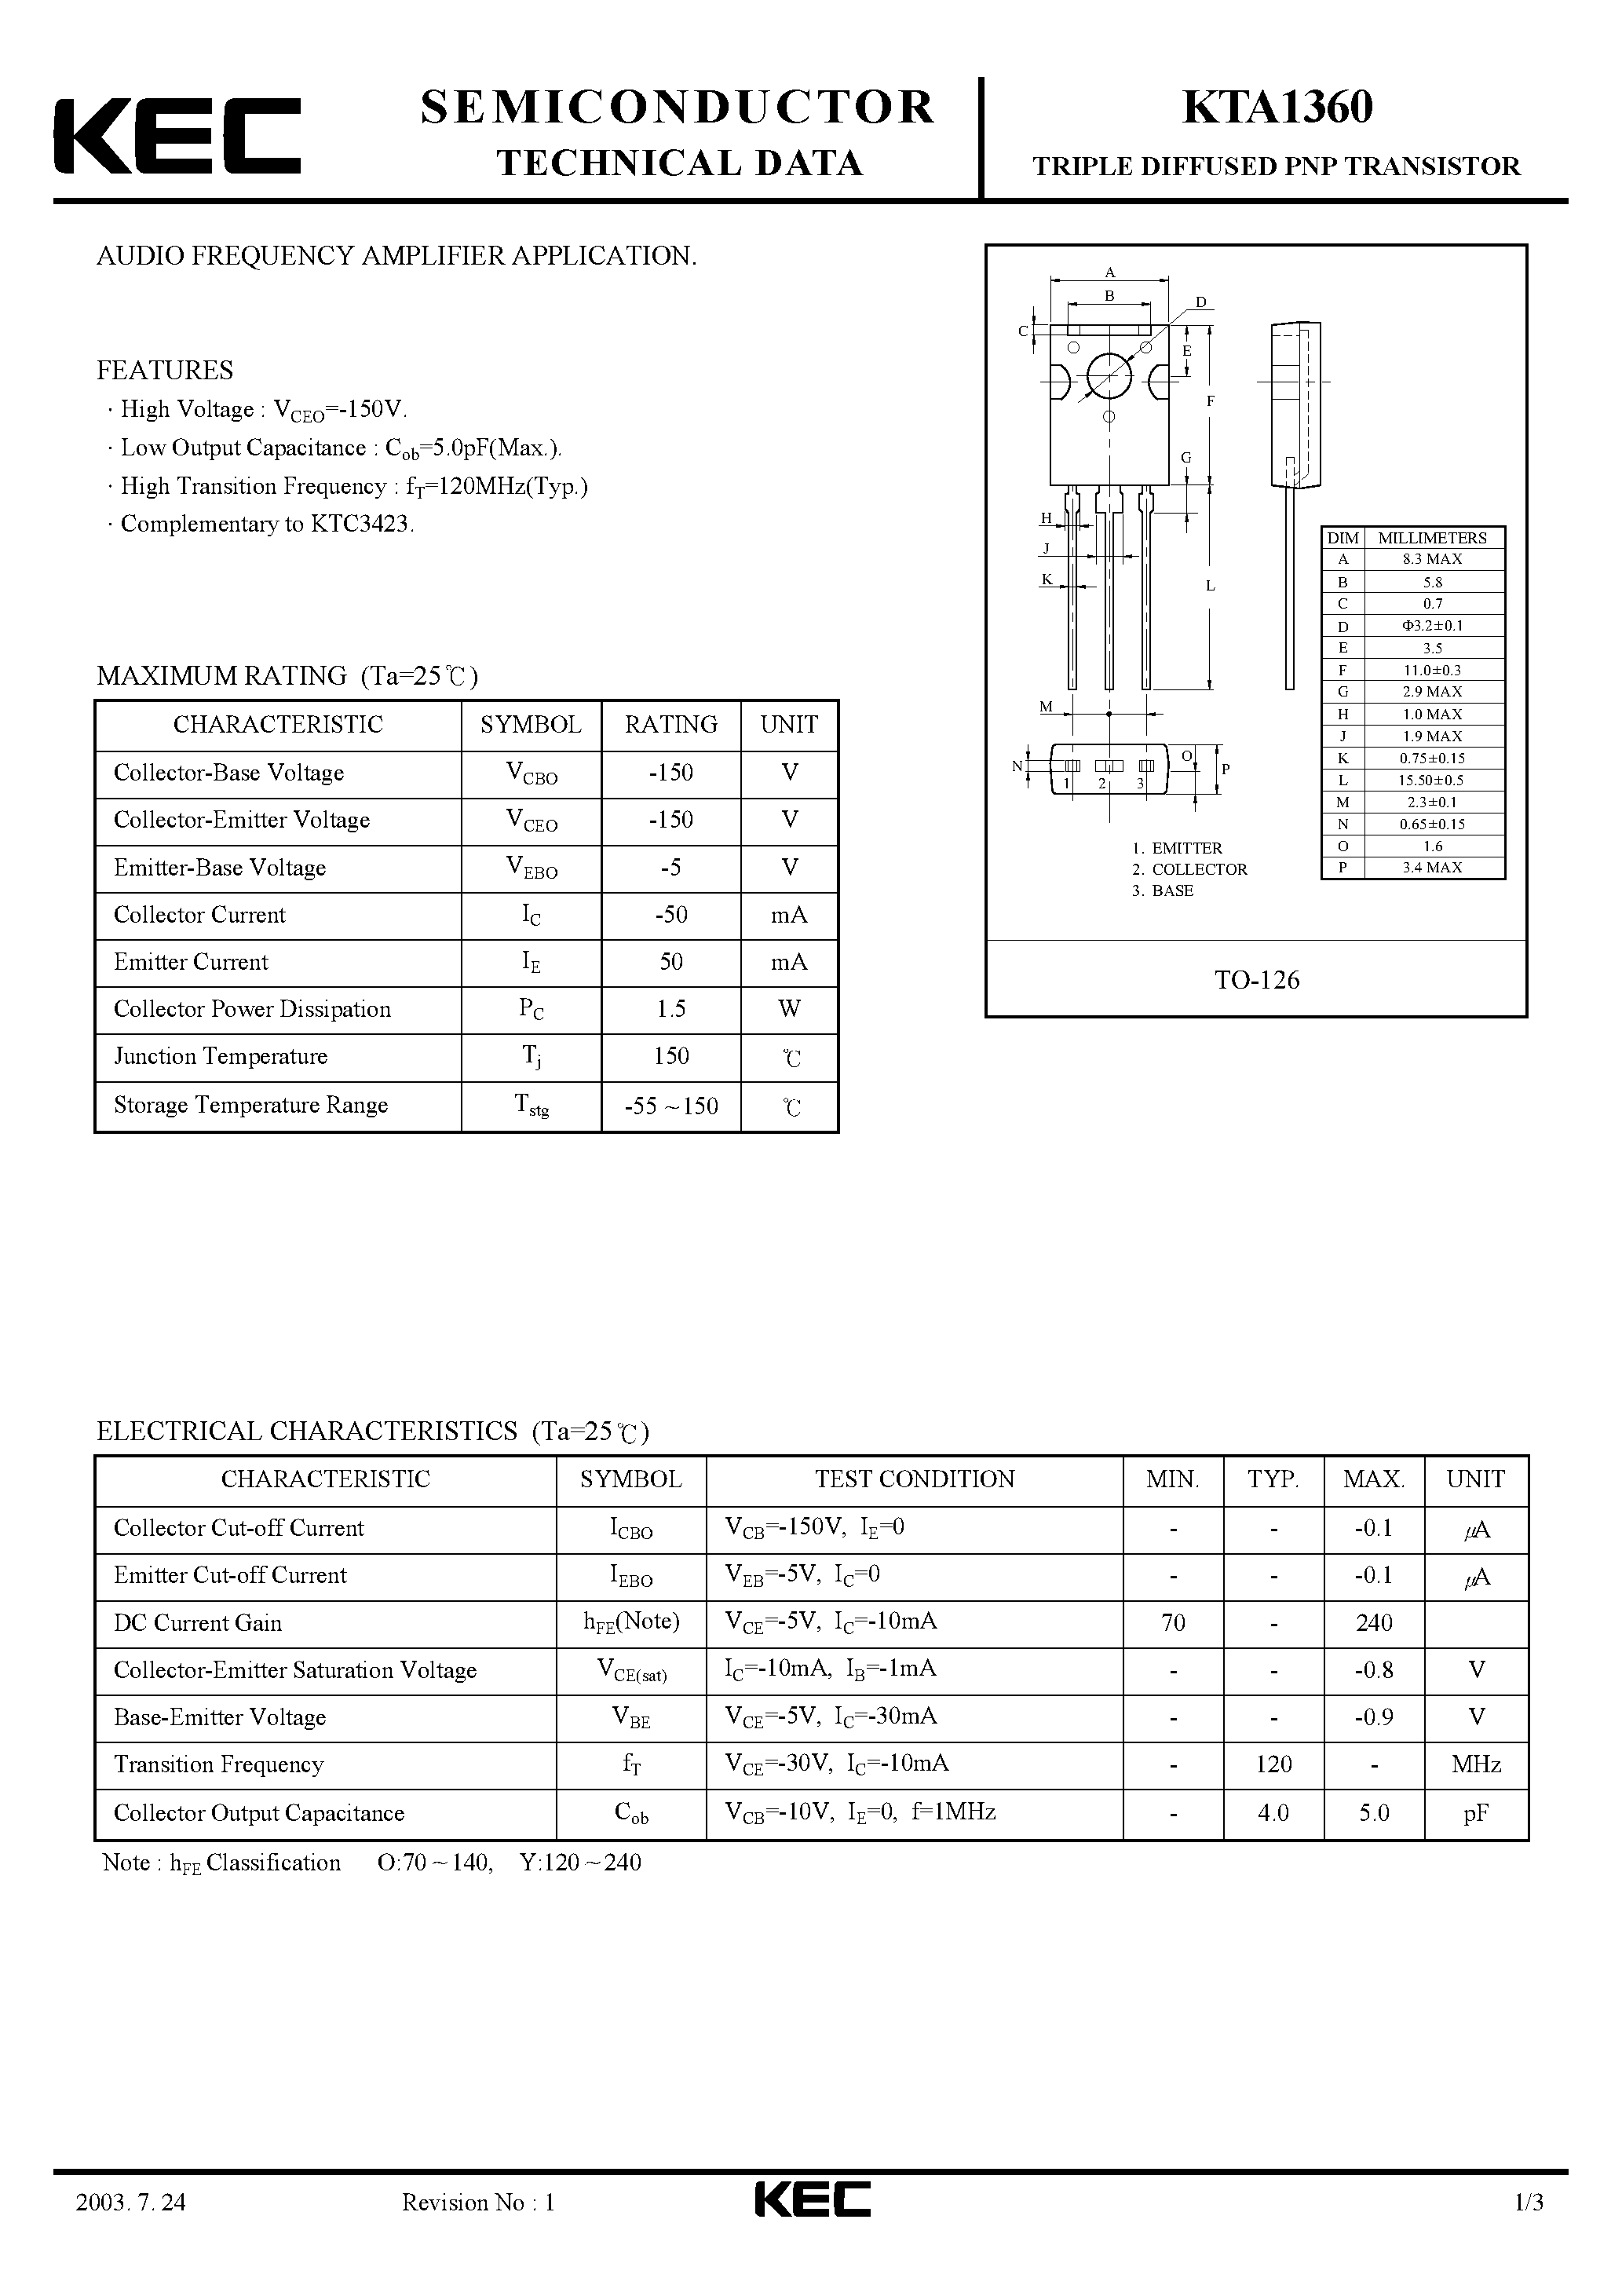 Datasheet KTA1360 - TRIPLE DIFFUSED PNP TRANSISTOR(AUDIO FREQUENCY AMPLIFIER) page 1